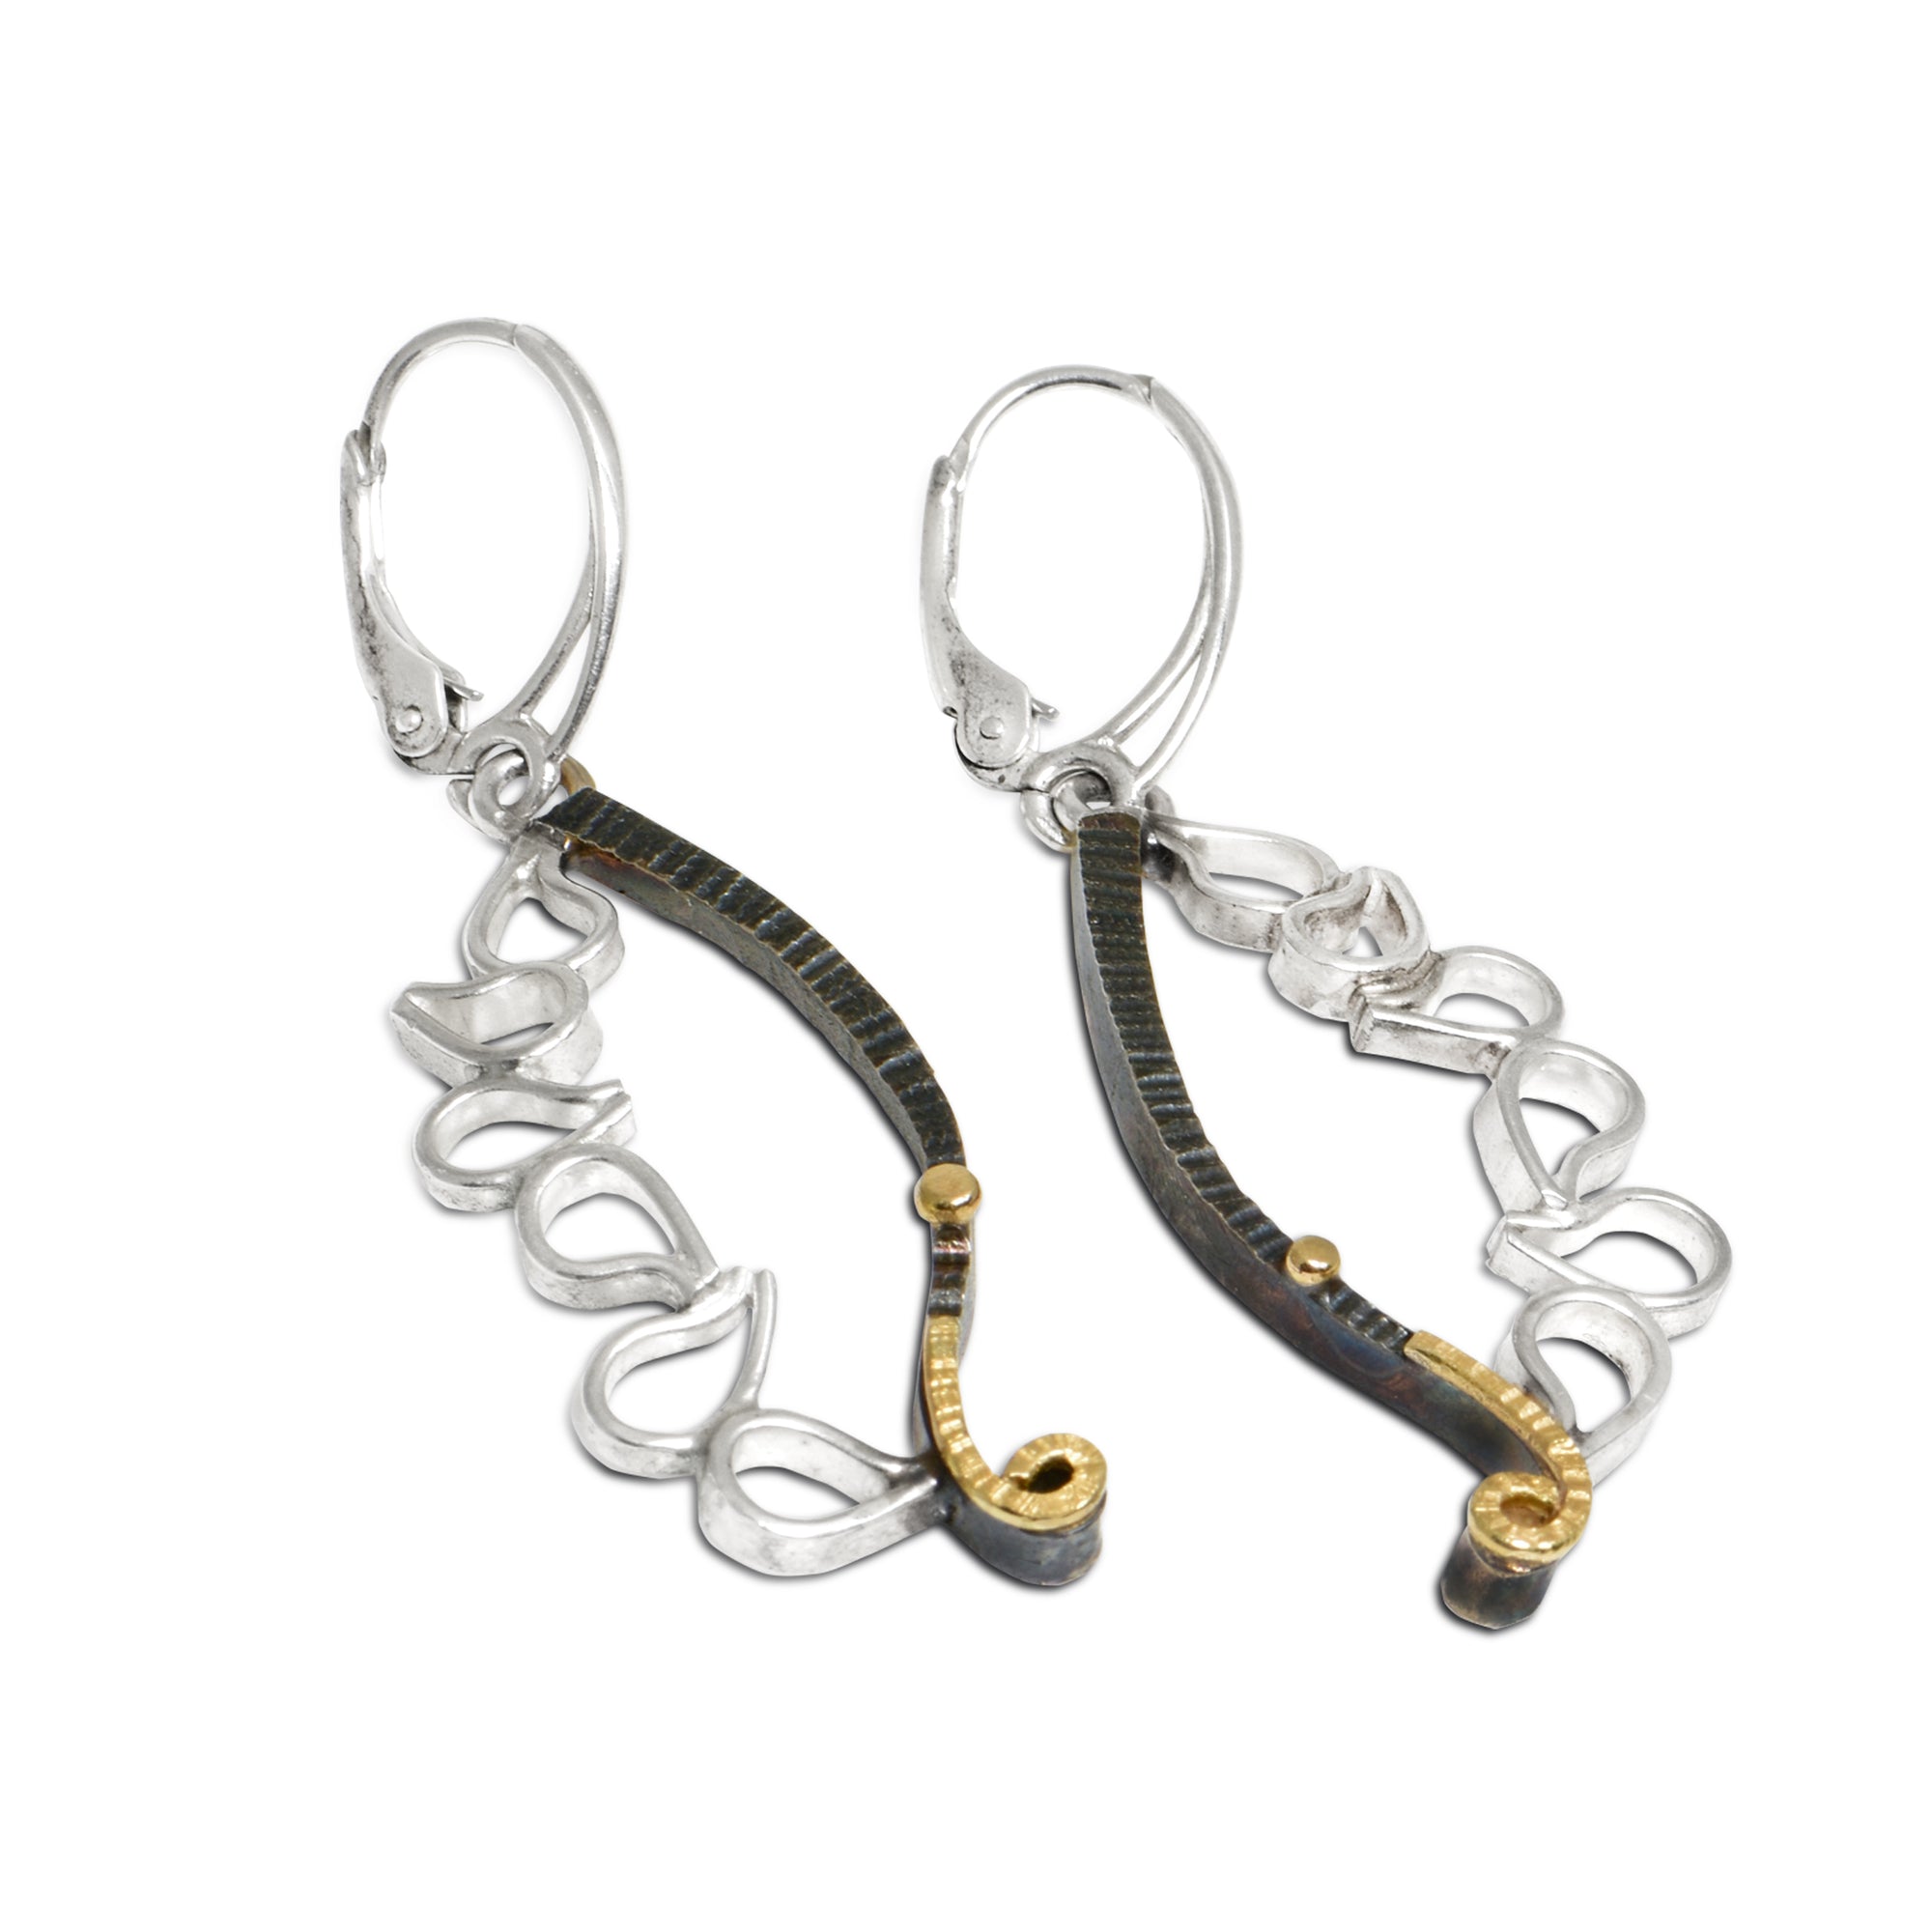 Argentium Dangle Earrings with 18kt gold curl